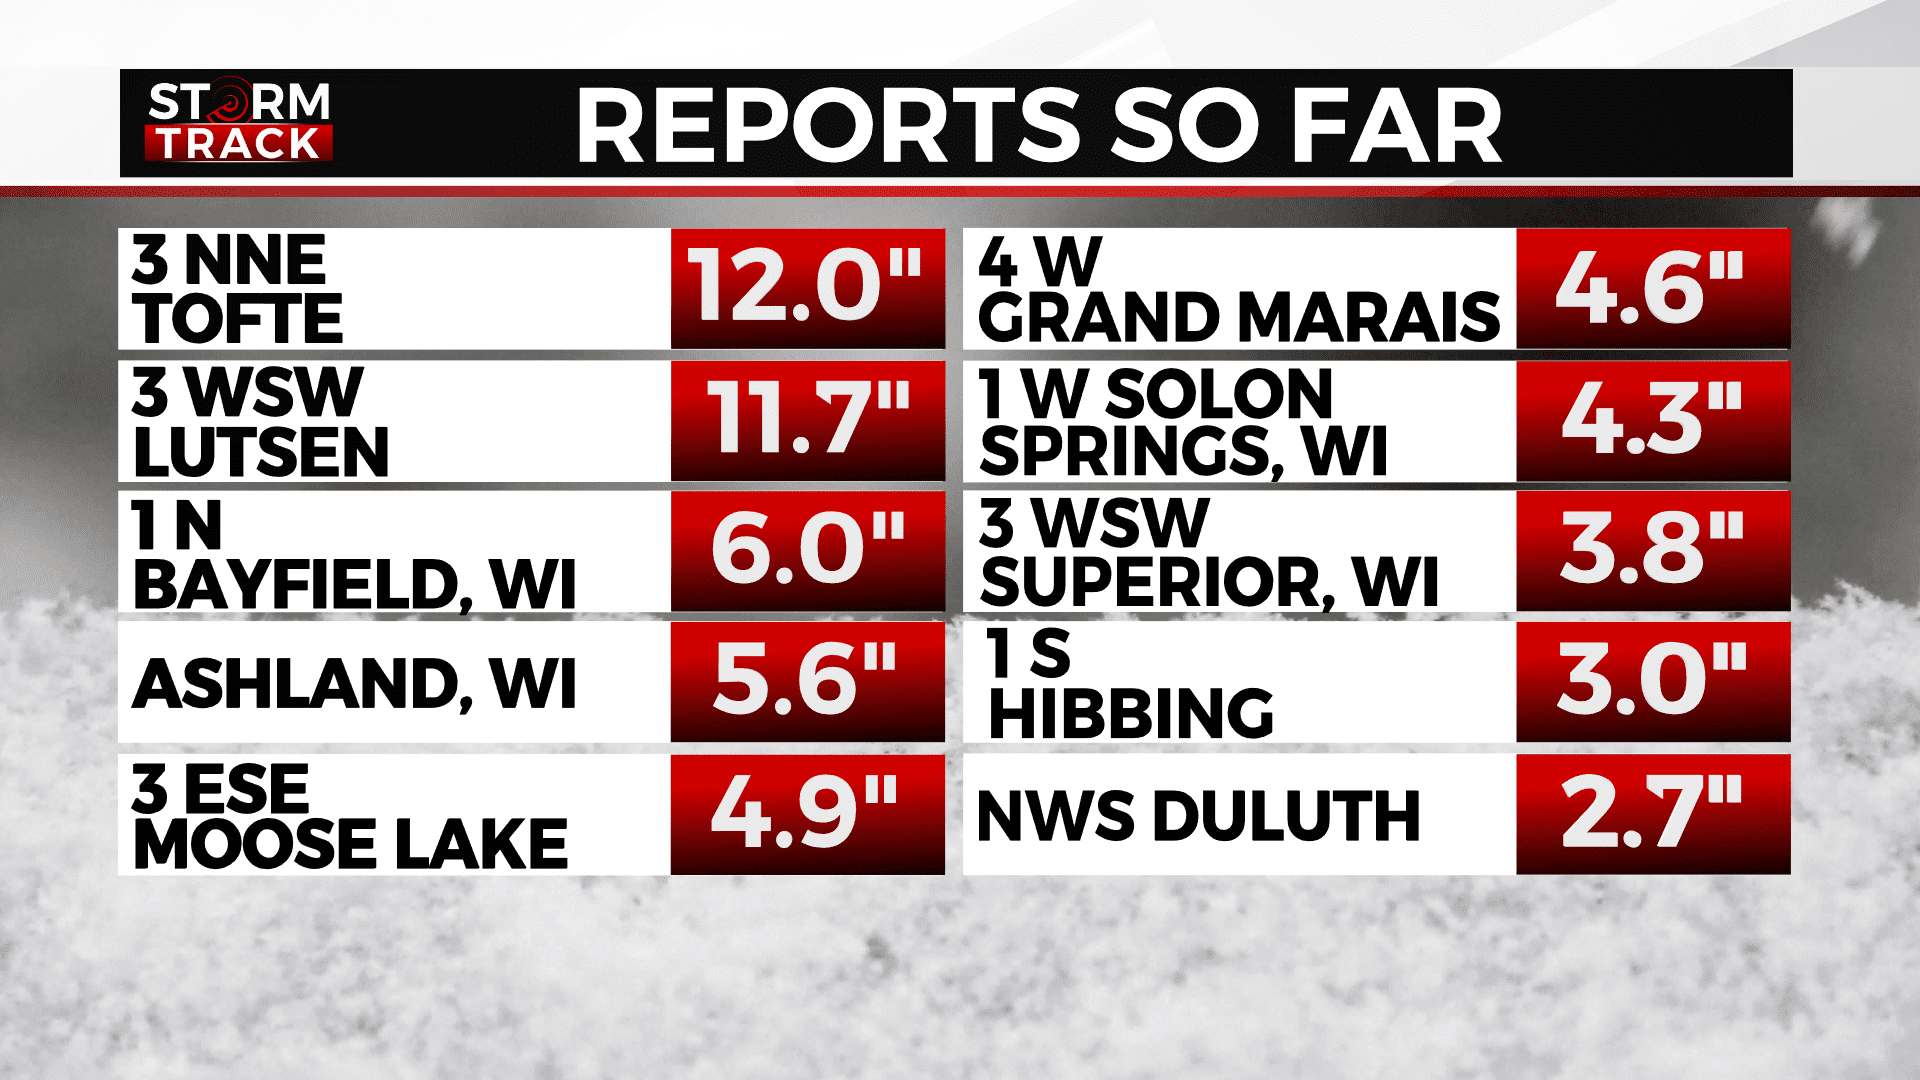 Snow reports as of 9 am 12/22